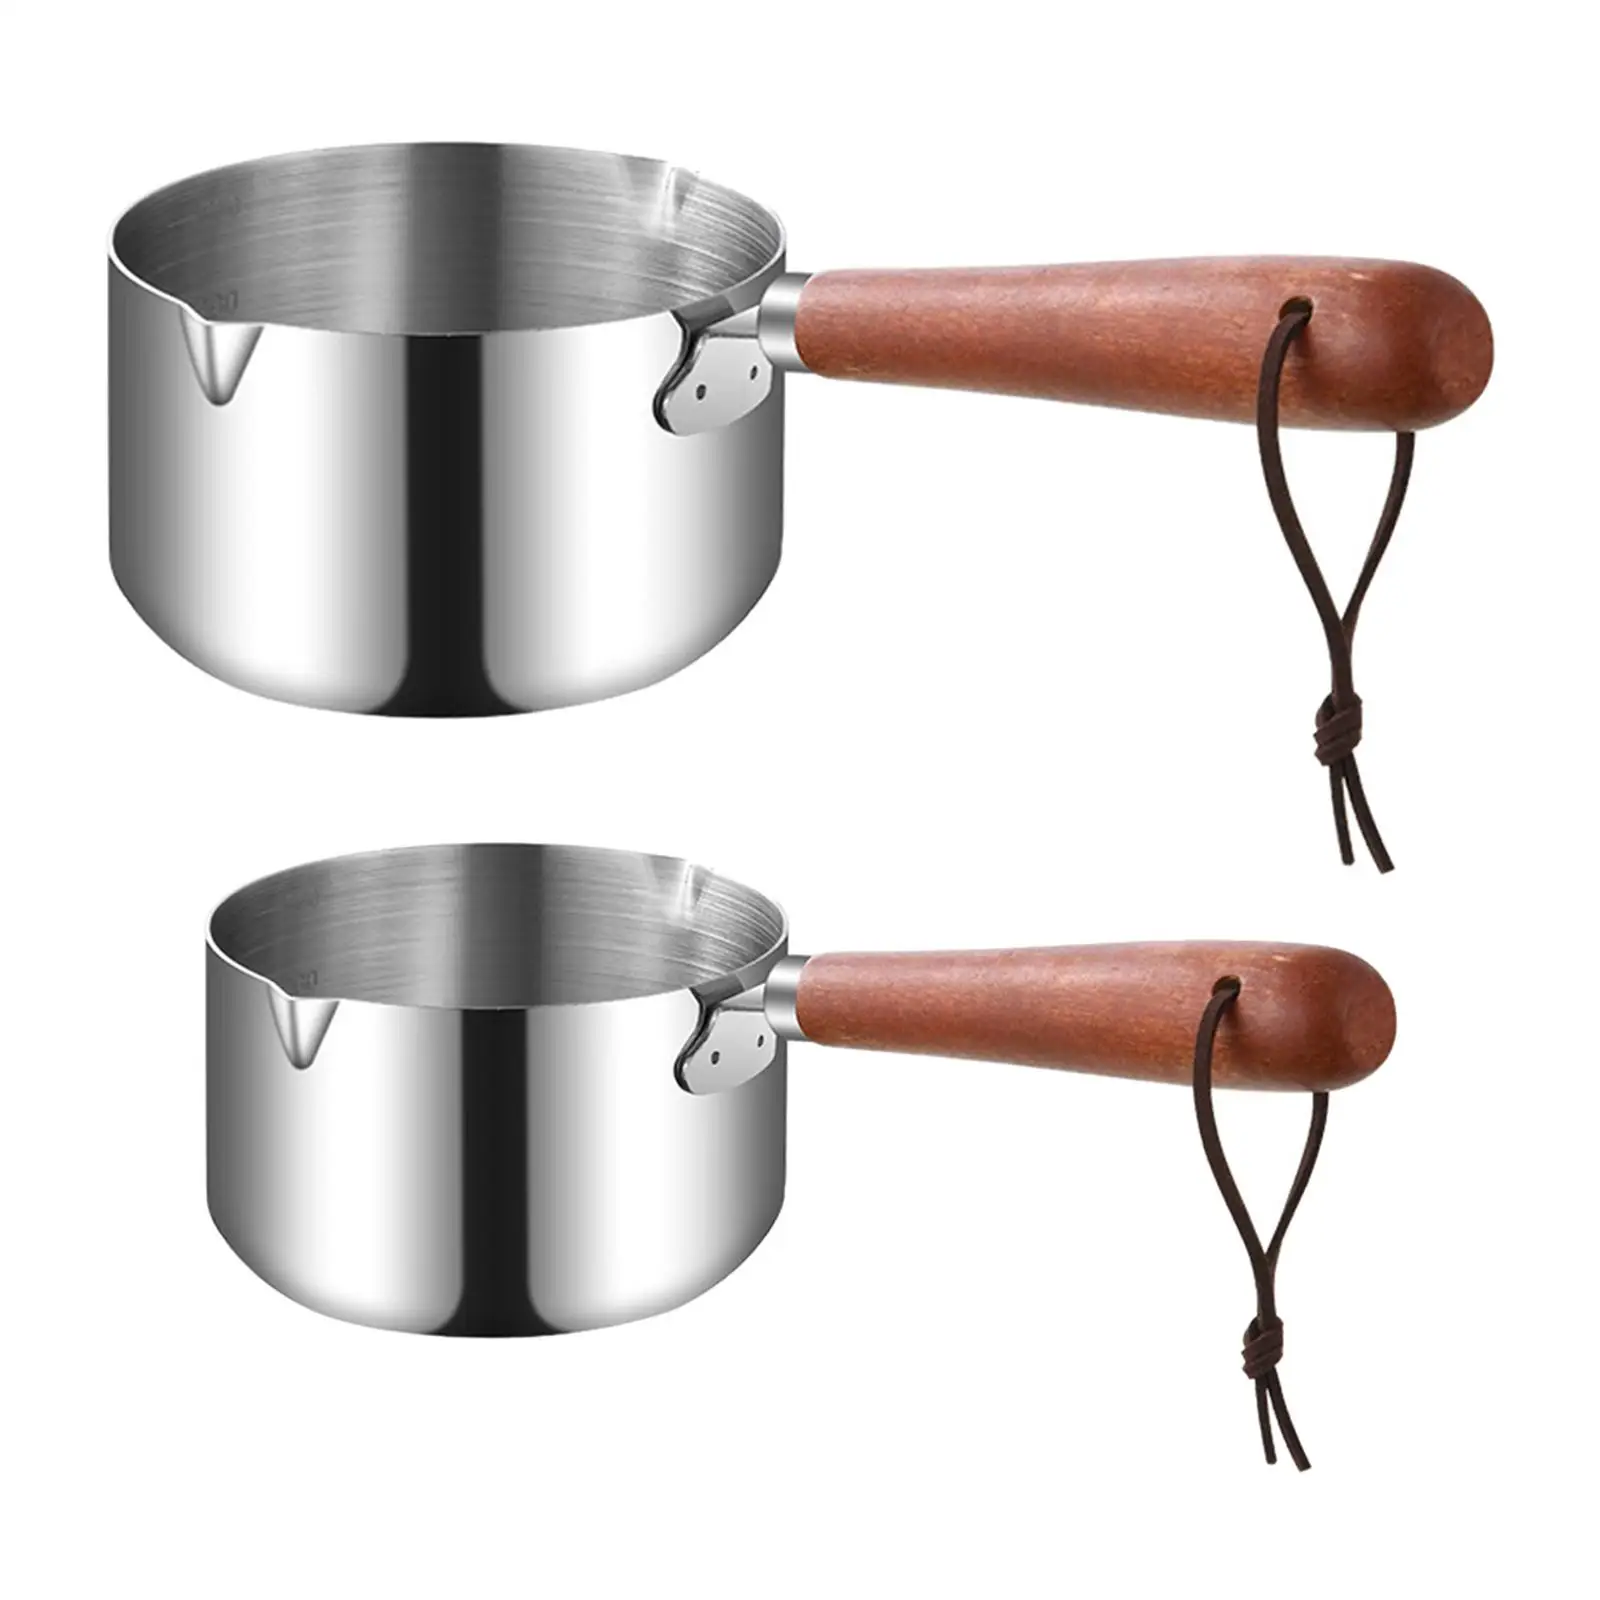 Butter Warmer Pot, Mini Saucepan Sauce Cup, Small Soup Pots for Making Sauces, Reheating Soups, Heating Milk, Boiling Water